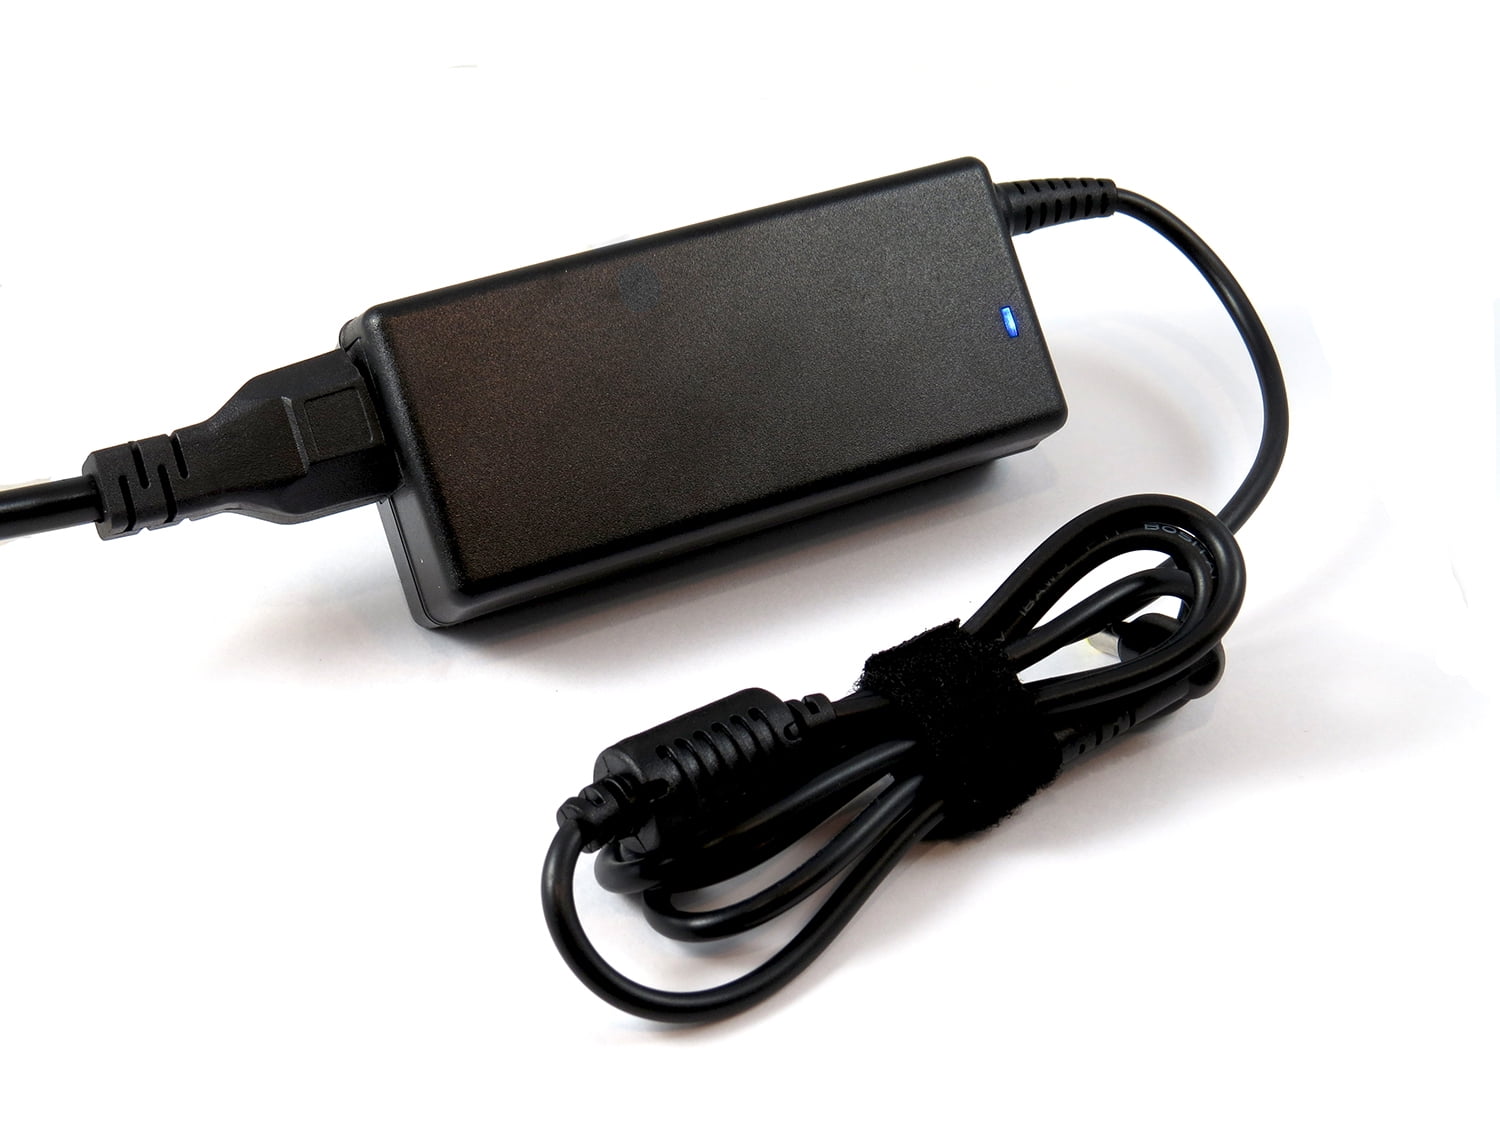 HQRP AC Adapter for HP Officejet 100 Mobile Printer L411 L411a L 411 411a Cn551ab1h Cn551a#b1h ; 65 Watt Charger Power Supply Cord Plus HQRP Coaster 